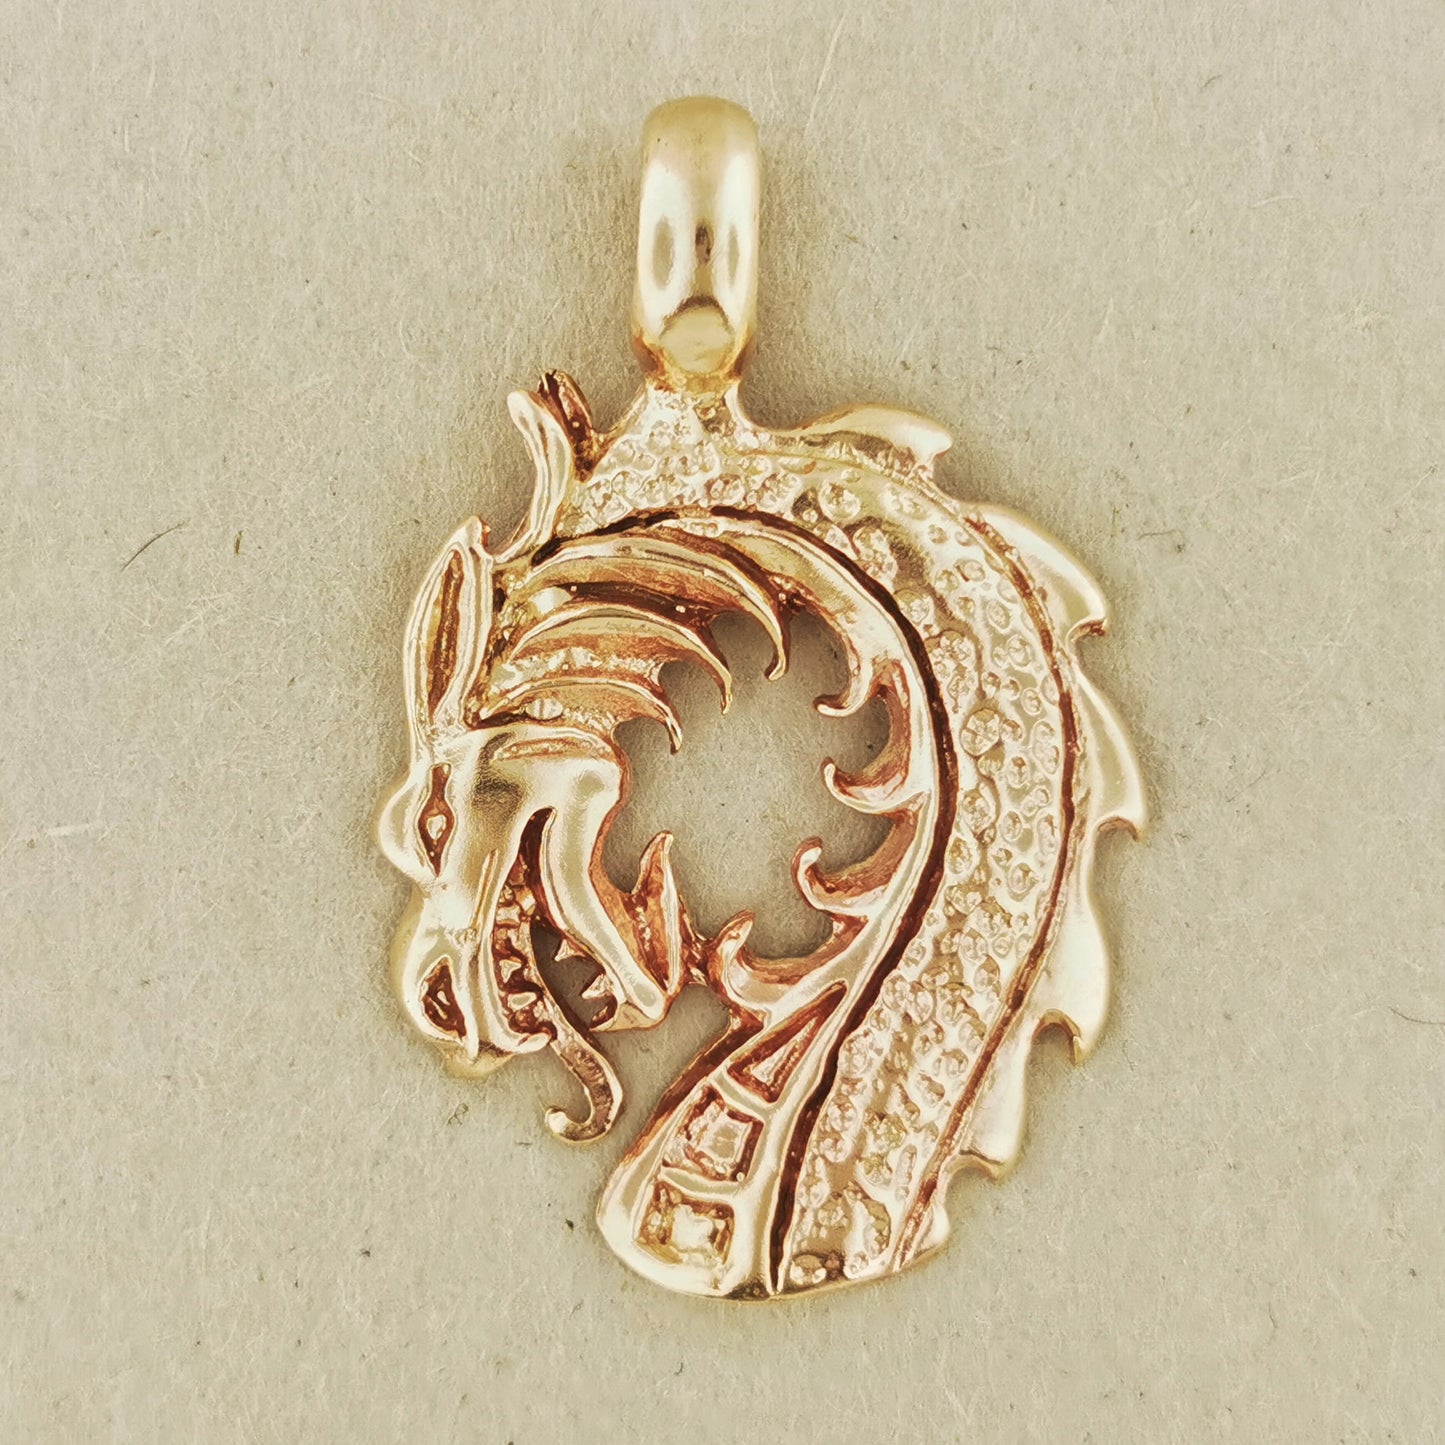 Dragon Head Pendant in Sterling Silver or Antique Bronze